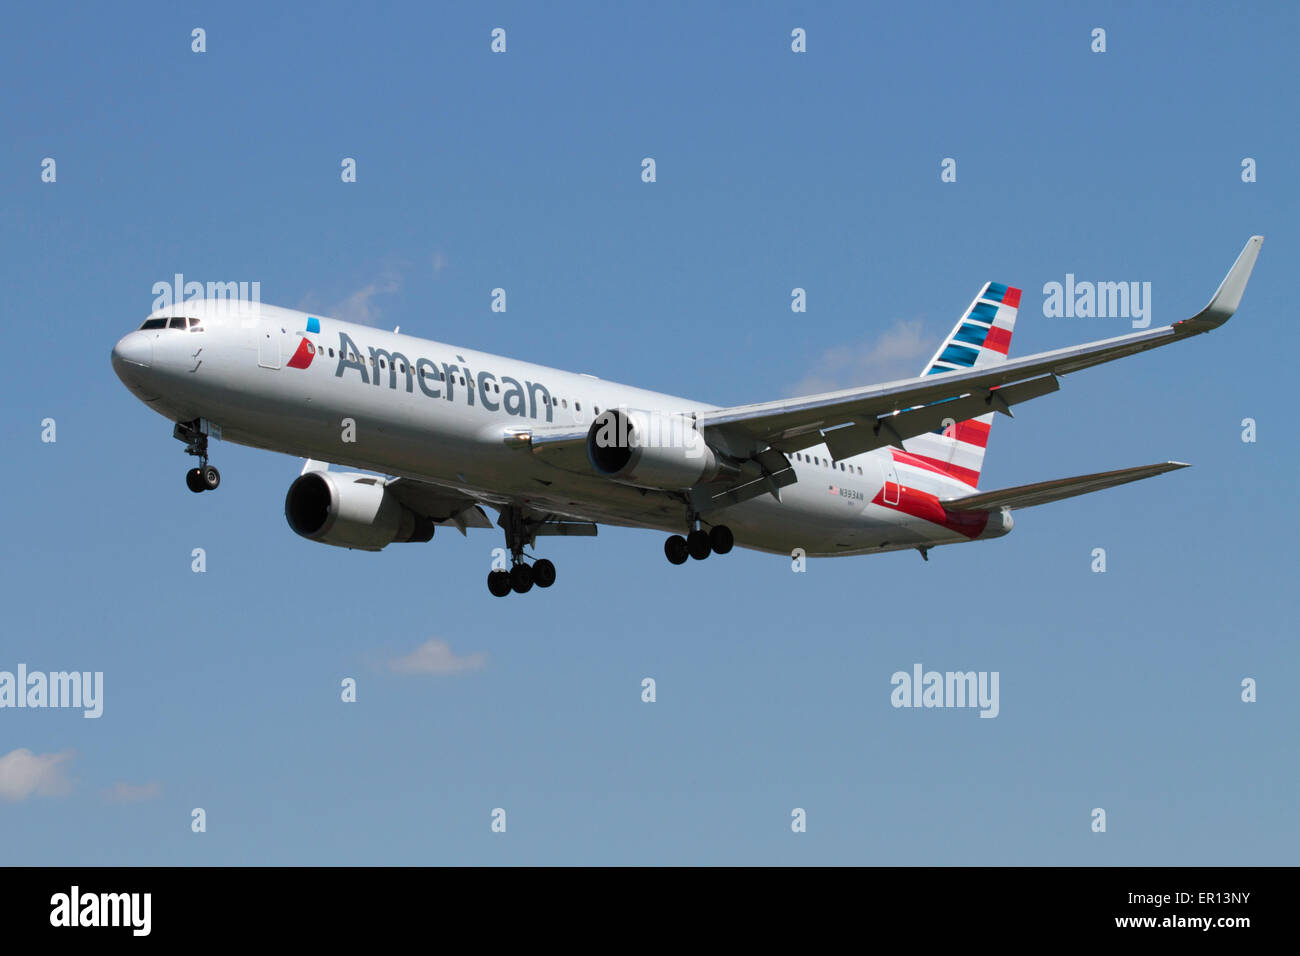 American Airlines Boeing 767-300ER passenger jet plane on approach Stock Photo